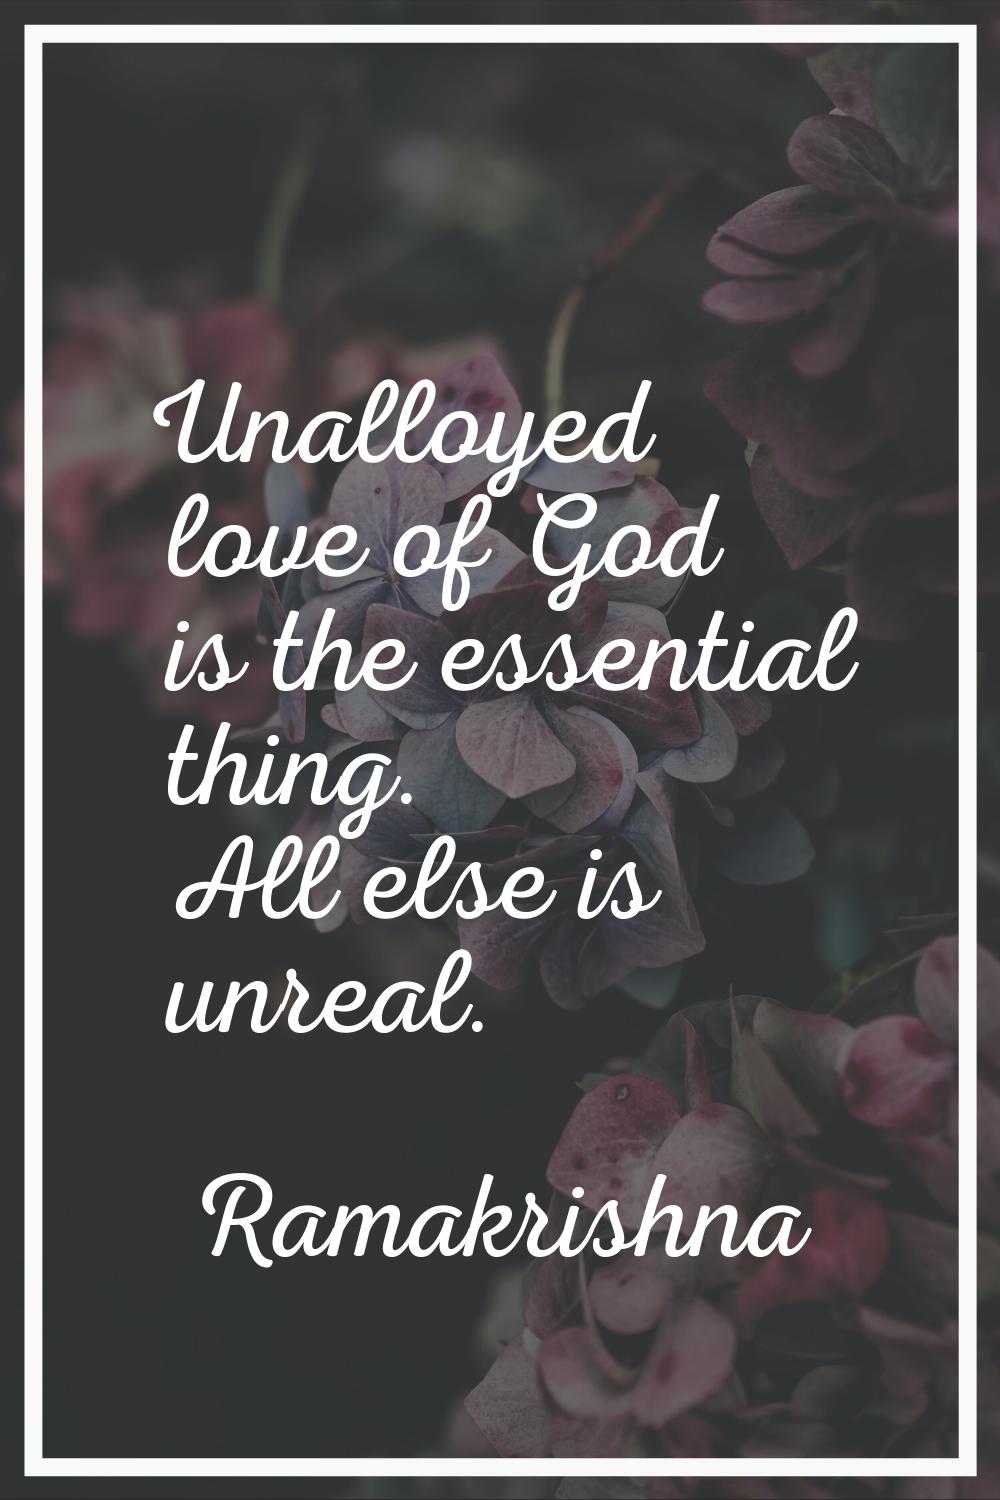 Unalloyed love of God is the essential thing. All else is unreal.